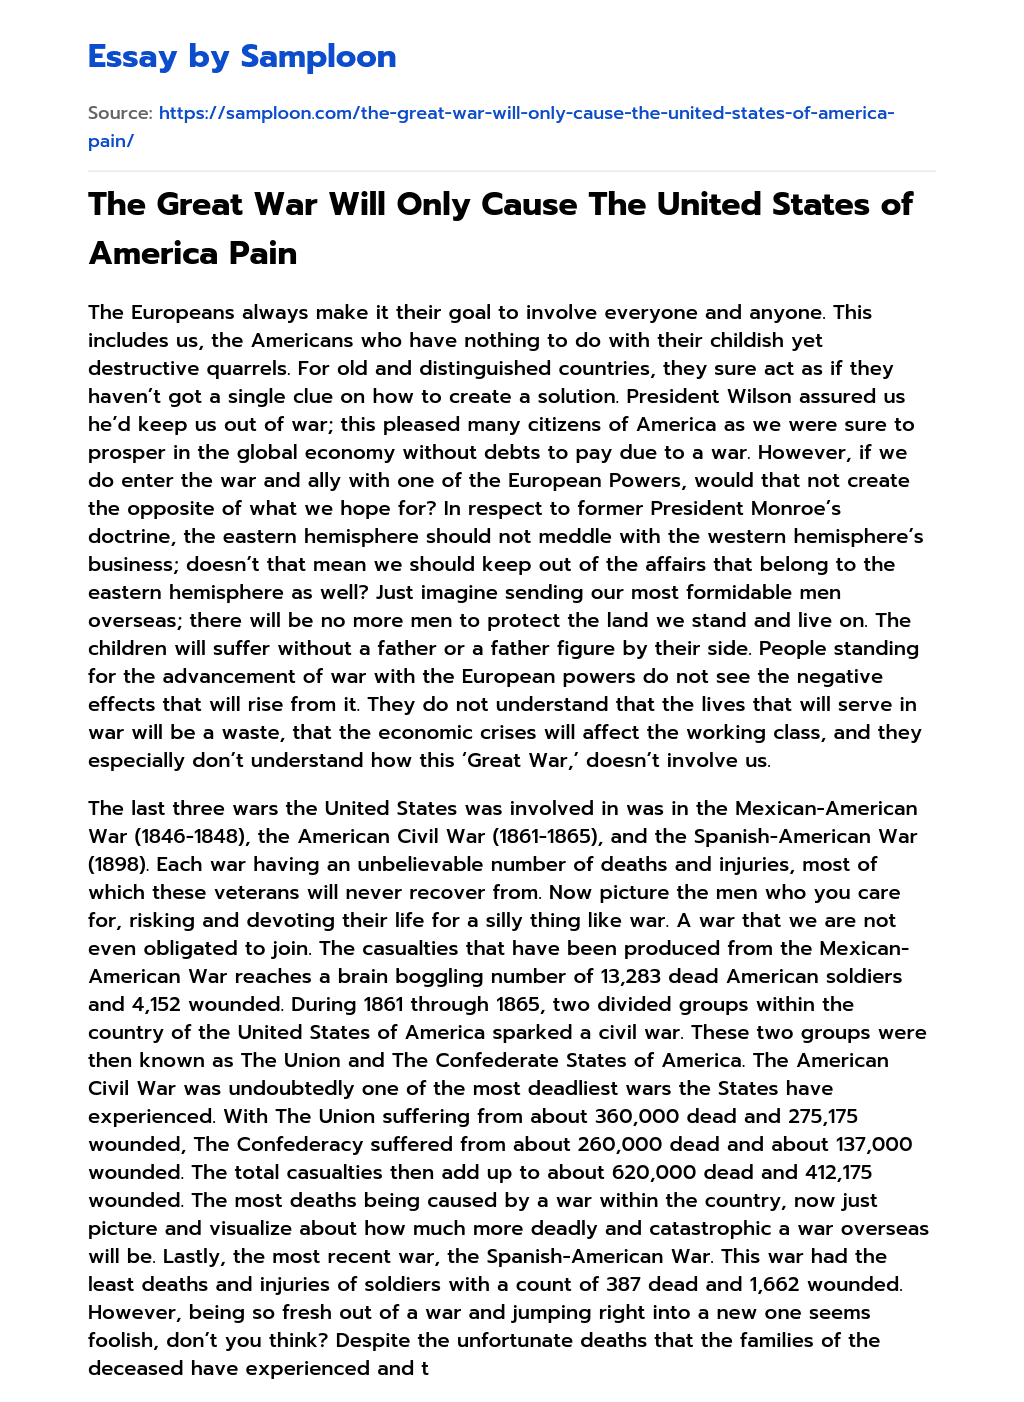 The Great War Will Only Cause The United States of America Pain essay